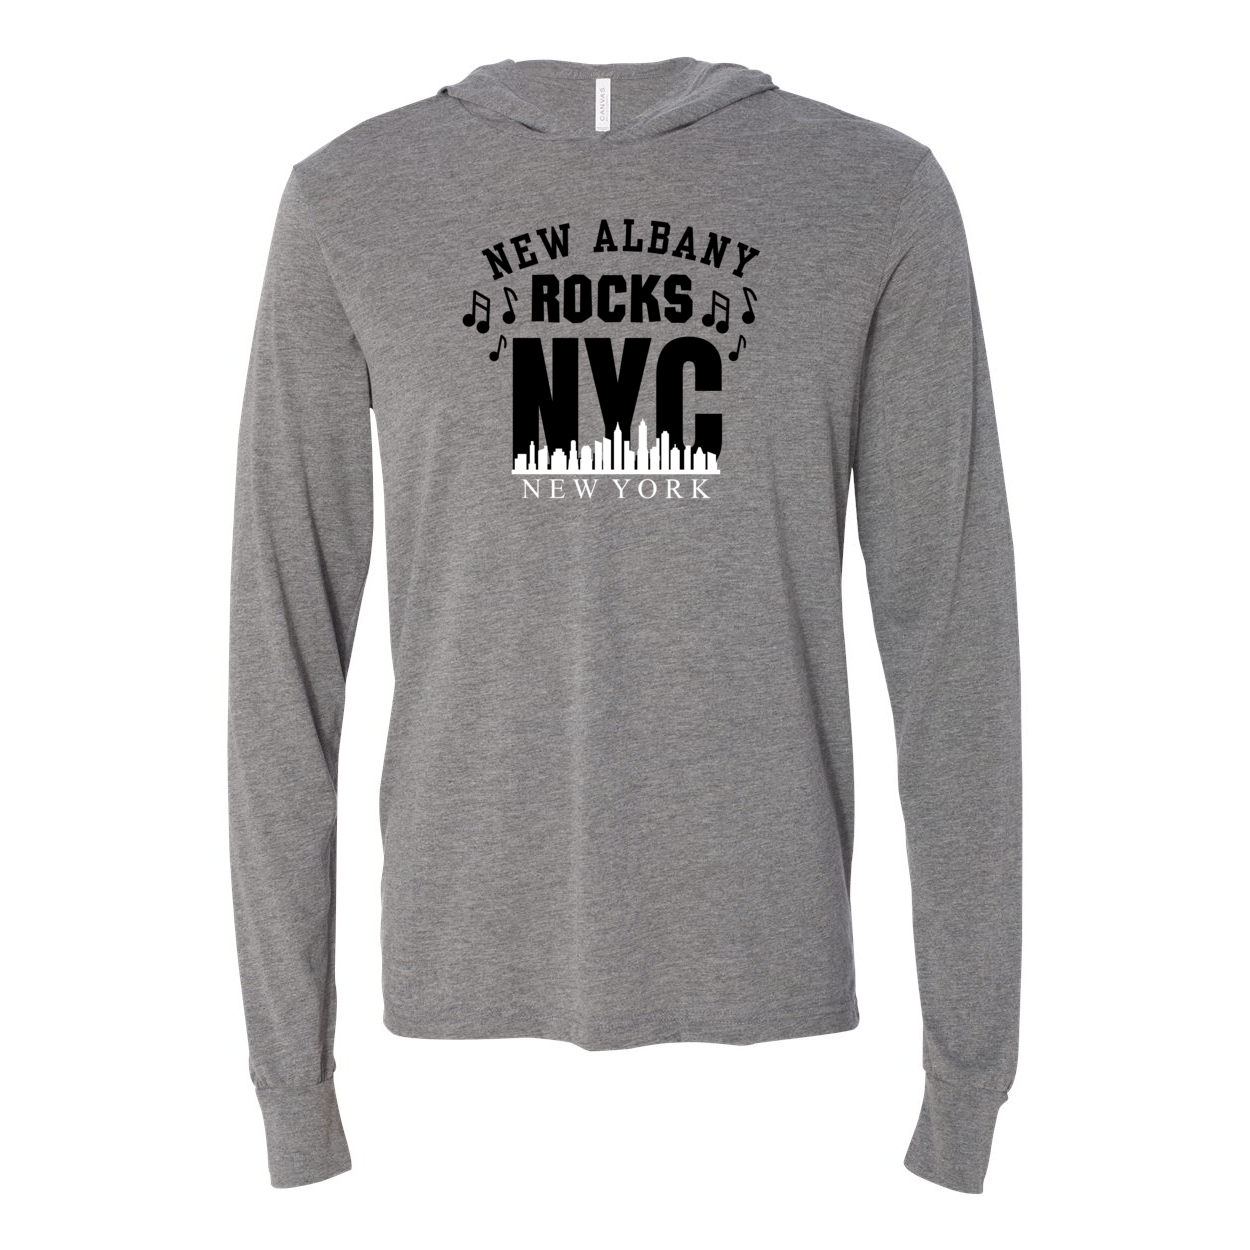 Adult Unisex Super Soft Rock NYC Graphic Long Sleeve Hooded Tee - New Albany Eagles